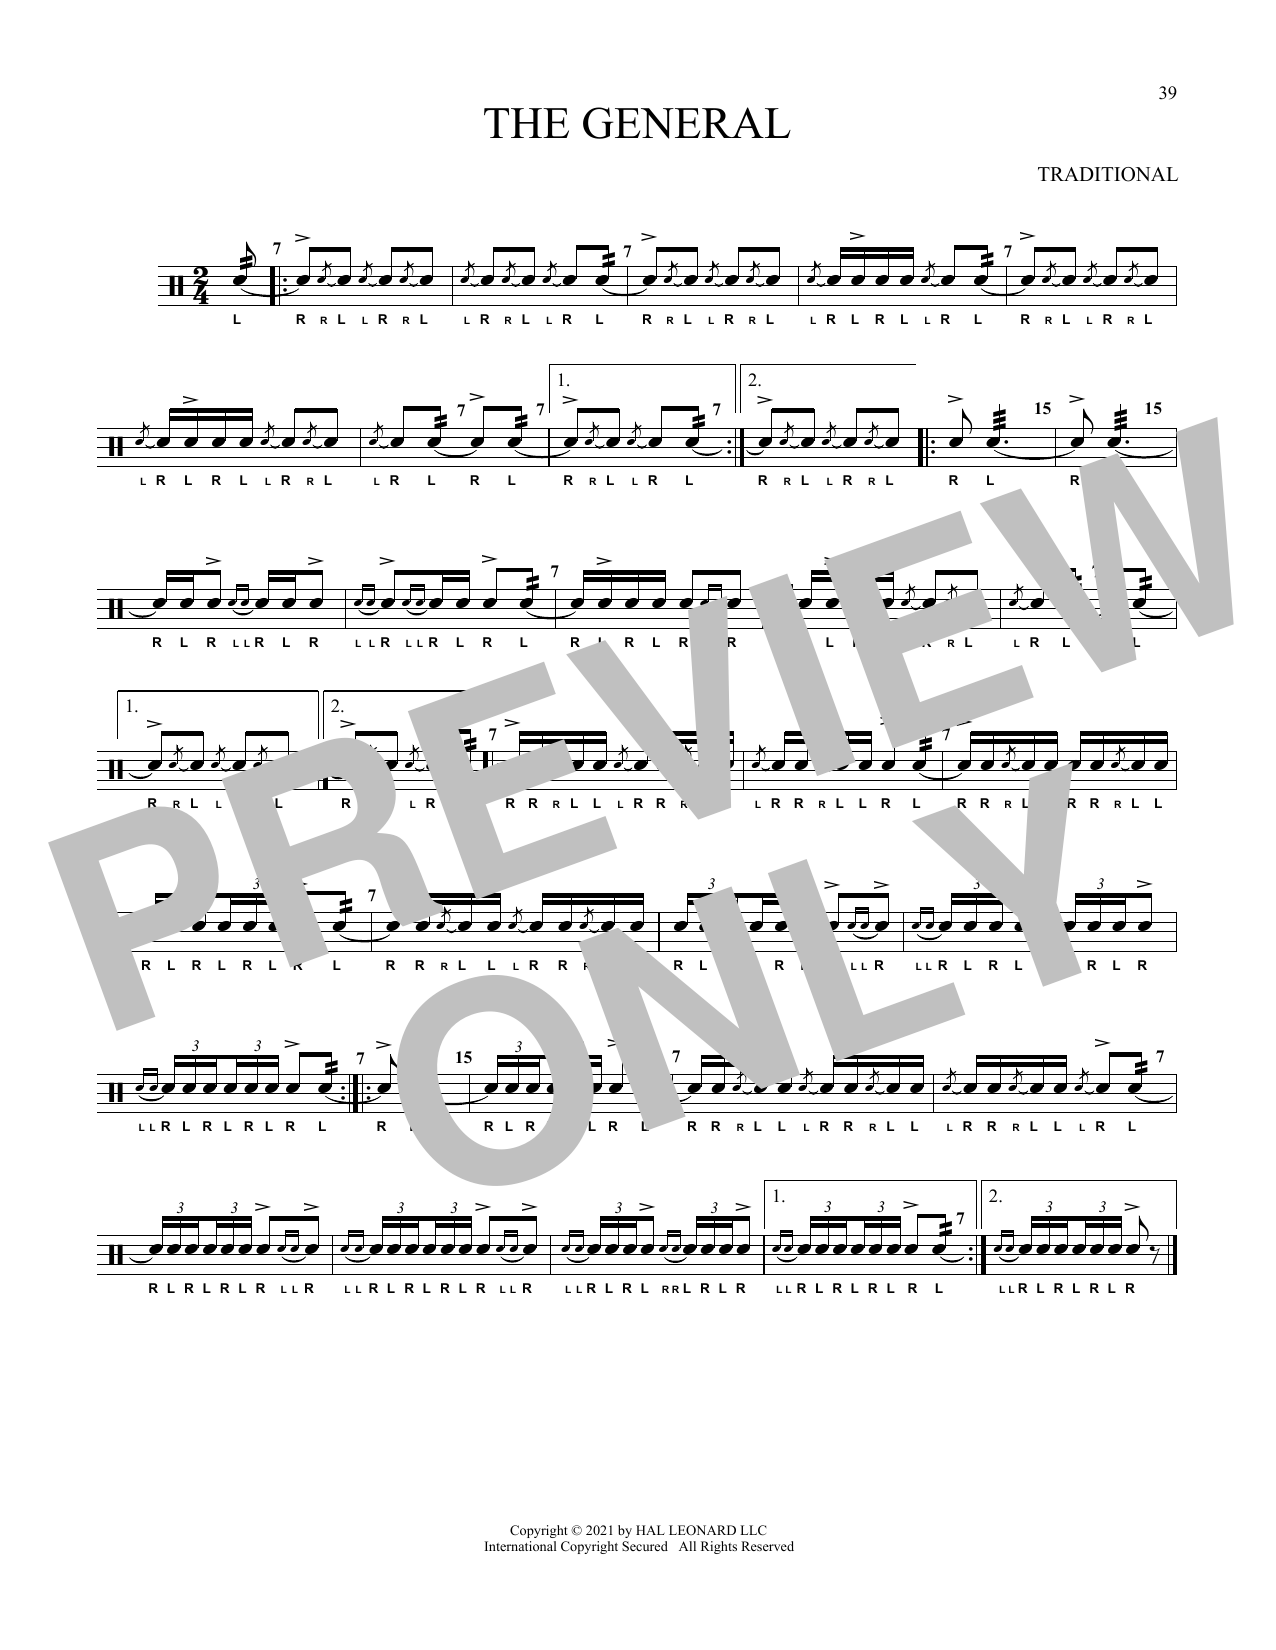 Download Traditional The General Sheet Music